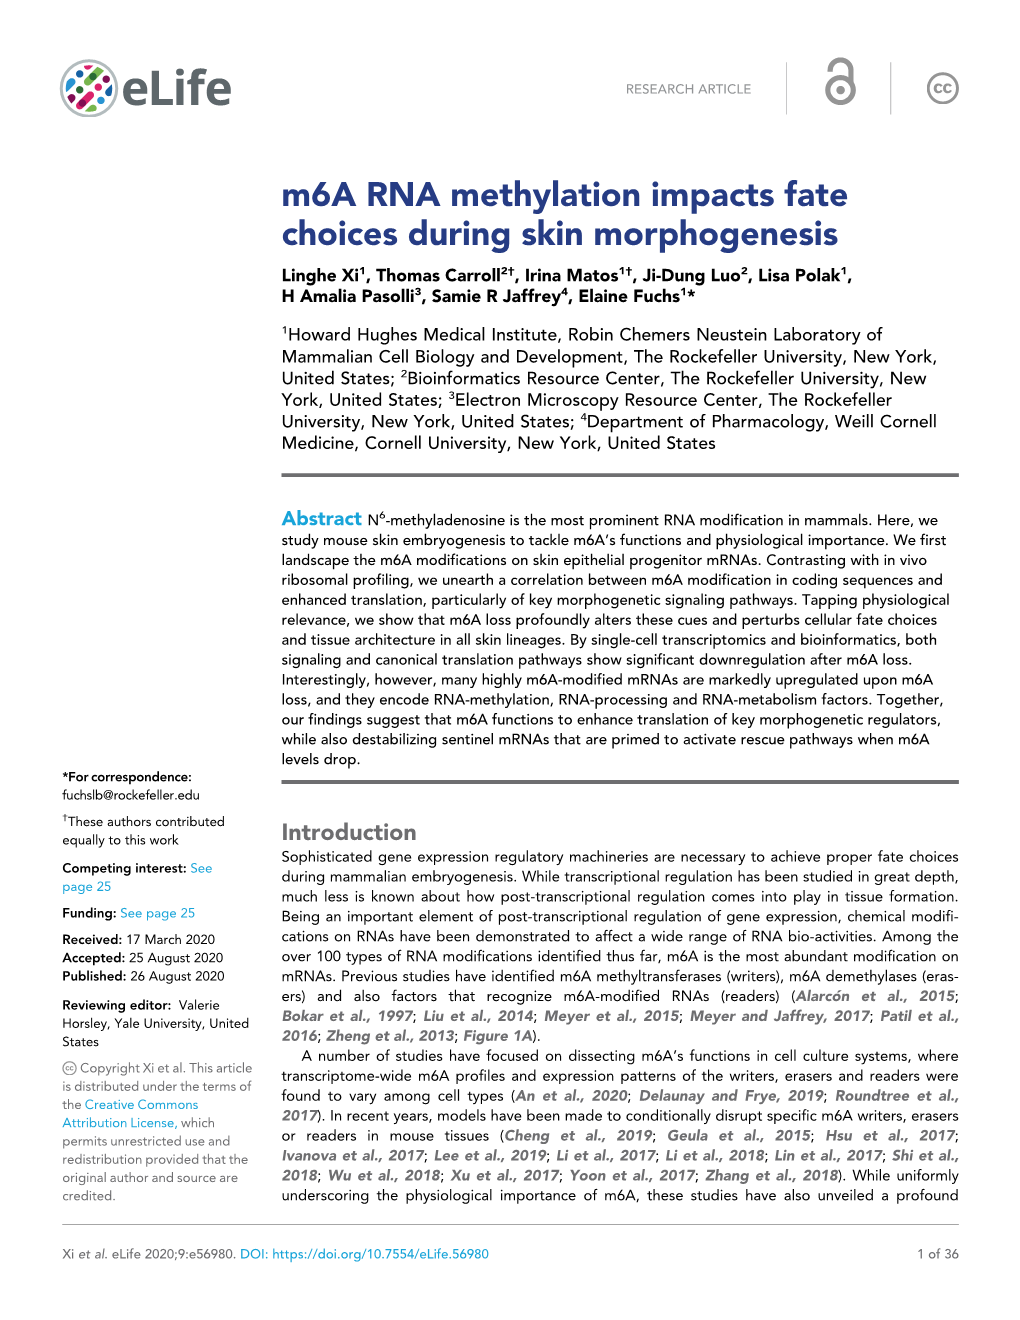 M6a RNA Methylation Impacts Fate Choices During Skin Morphogenesis